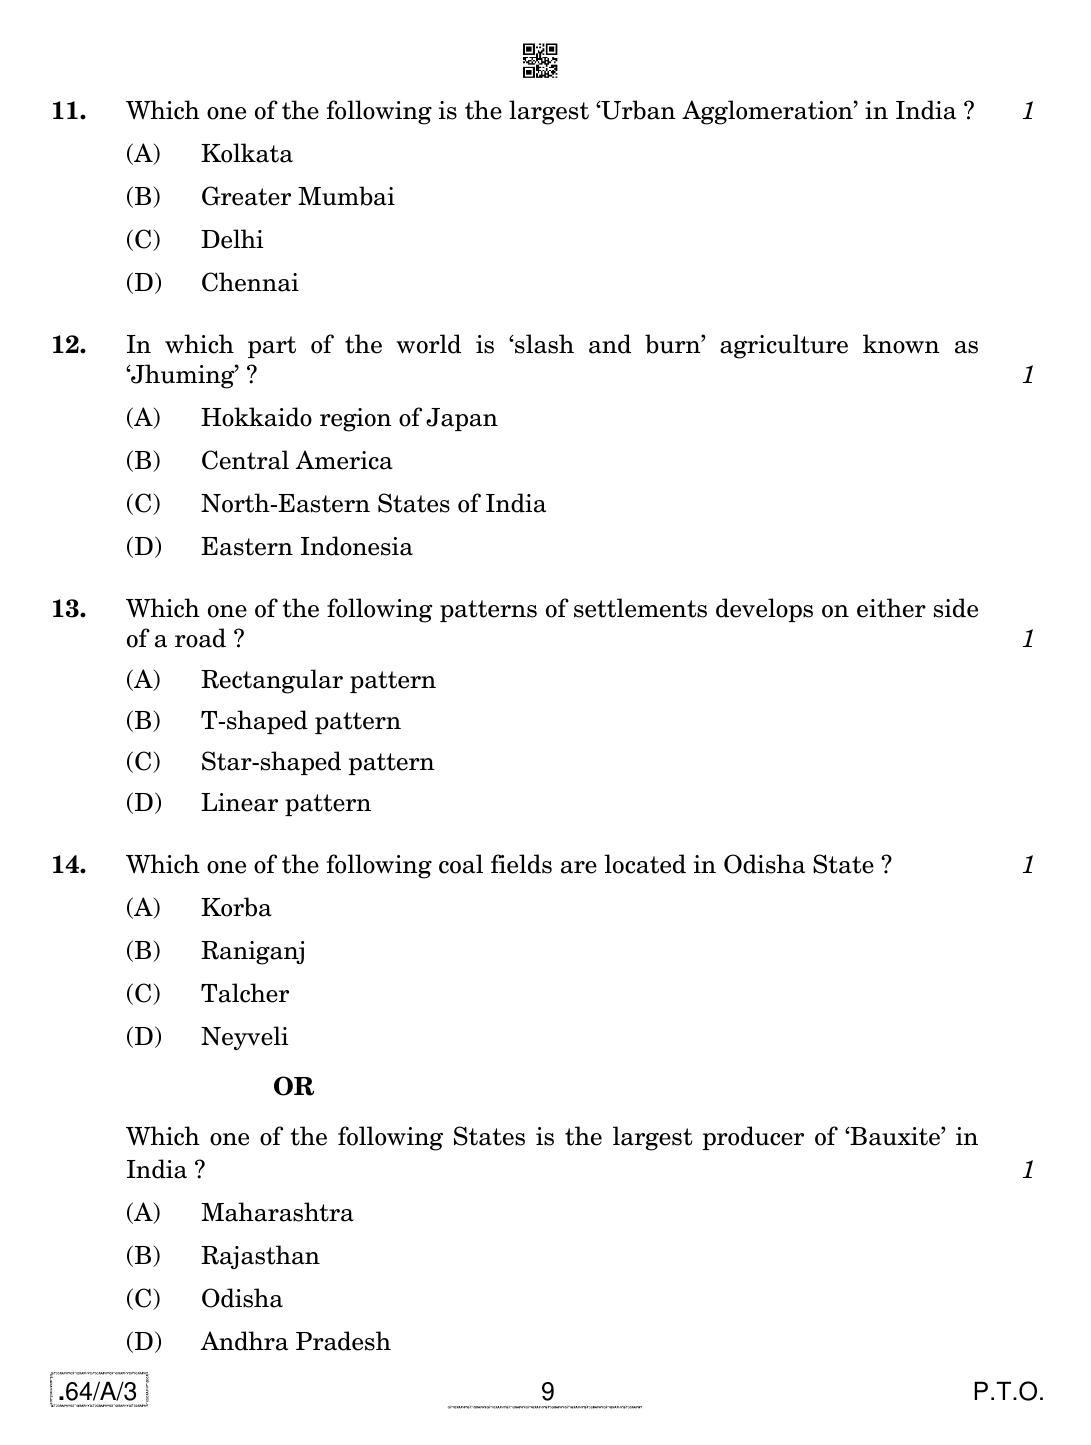 CBSE Class 12 64-C-3 - Geography 2020 Compartment Question Paper - Page 9